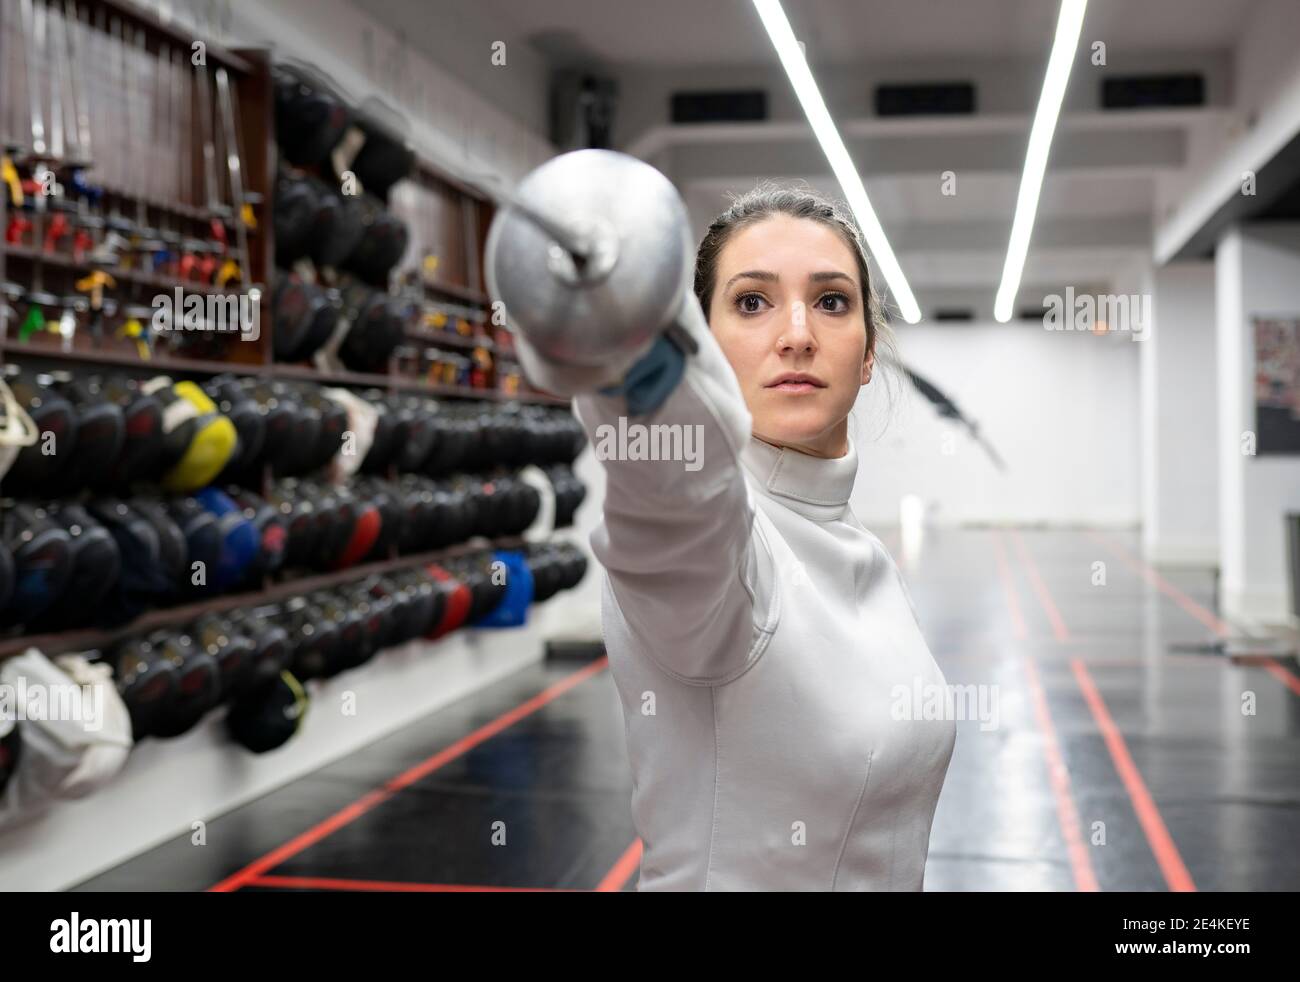 Woman in fencing outfit practicing at gym Stock Photo